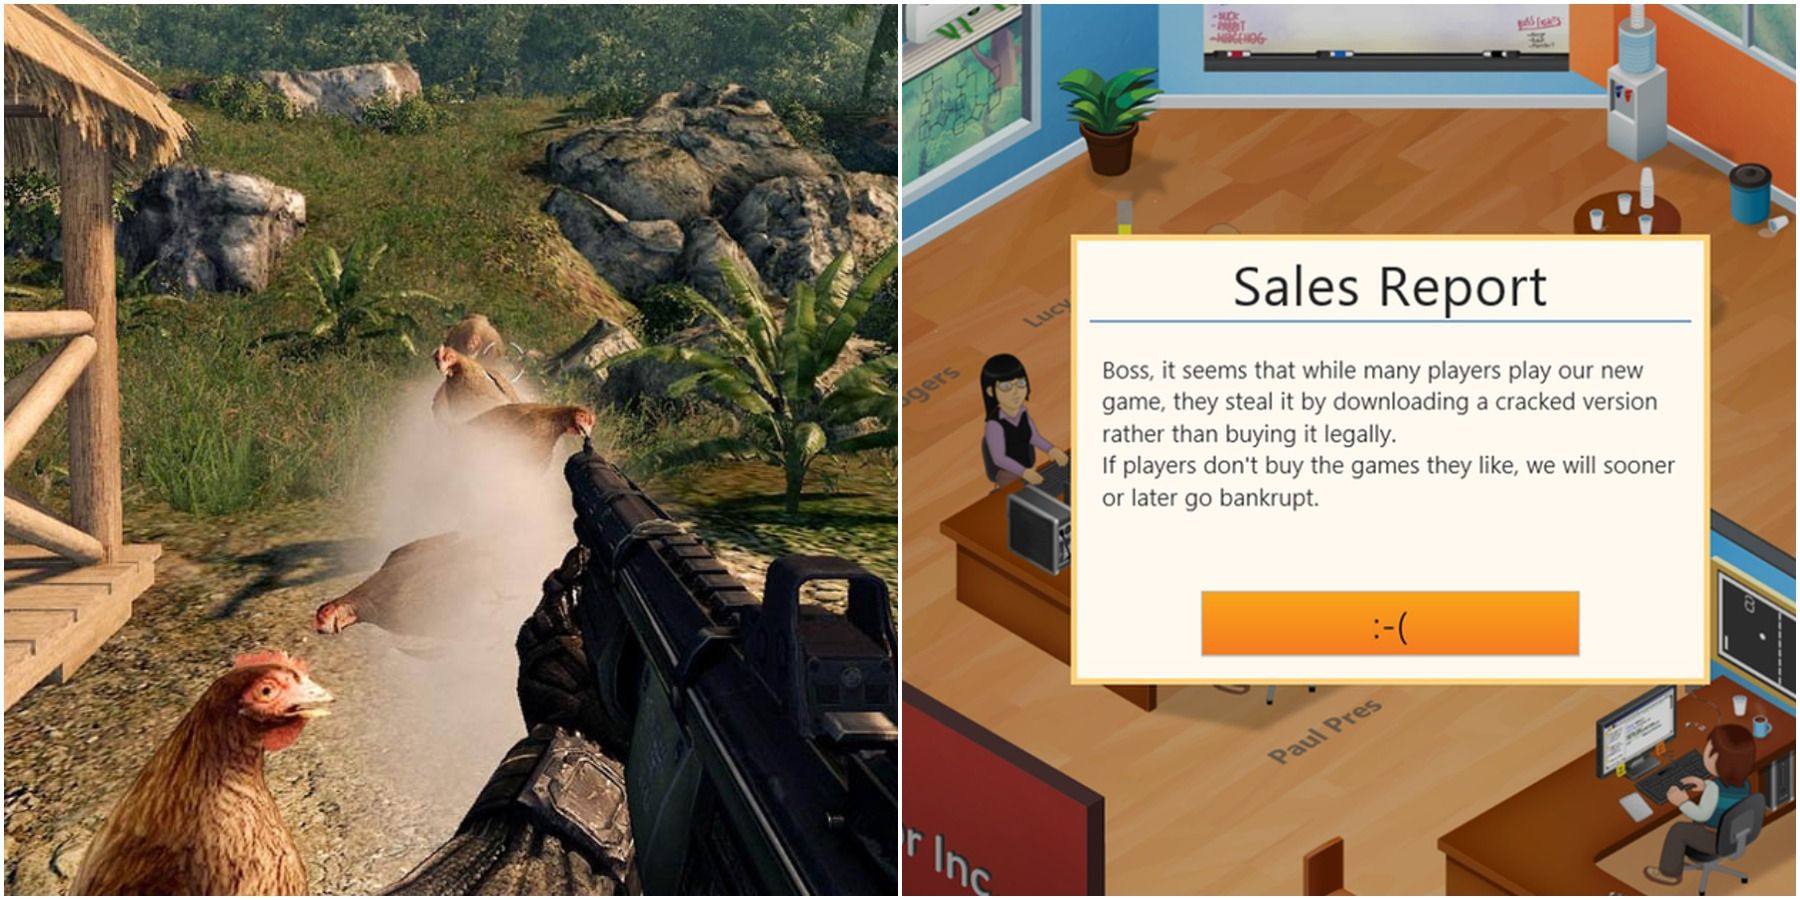 (Left) Gun shooting chickens (Right) Sales report message 